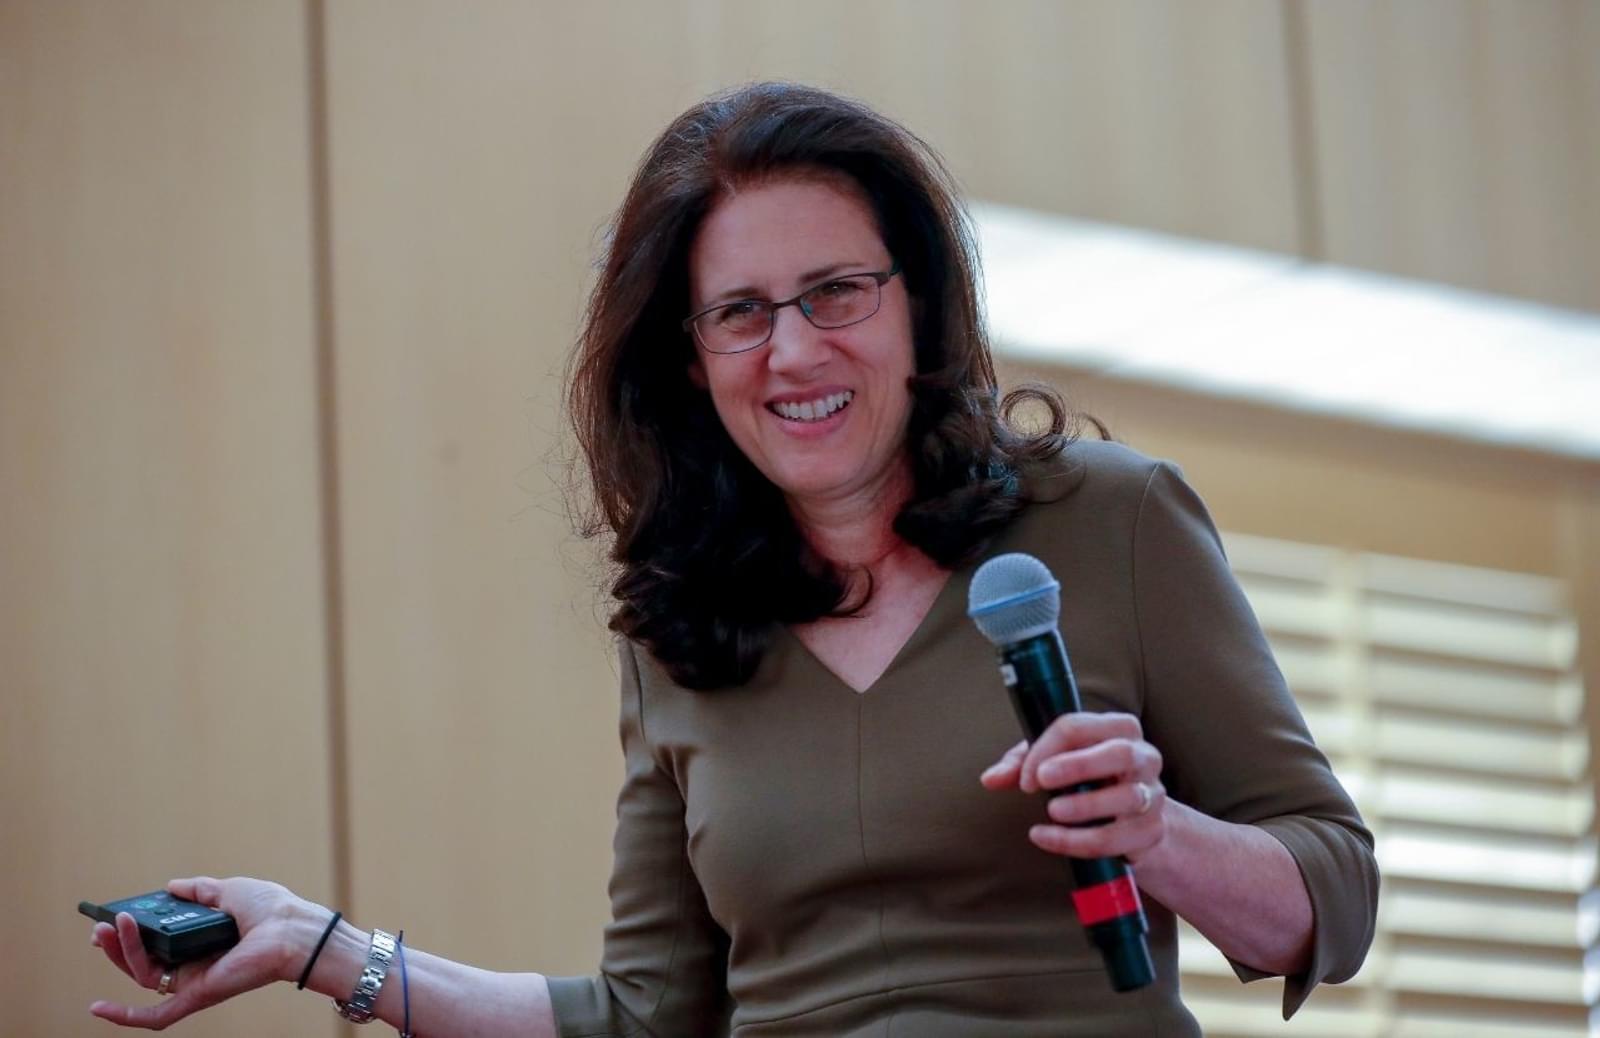 iRelaunch CEO and Co-Founder Carol Fishman Cohen holding microphone and smiling